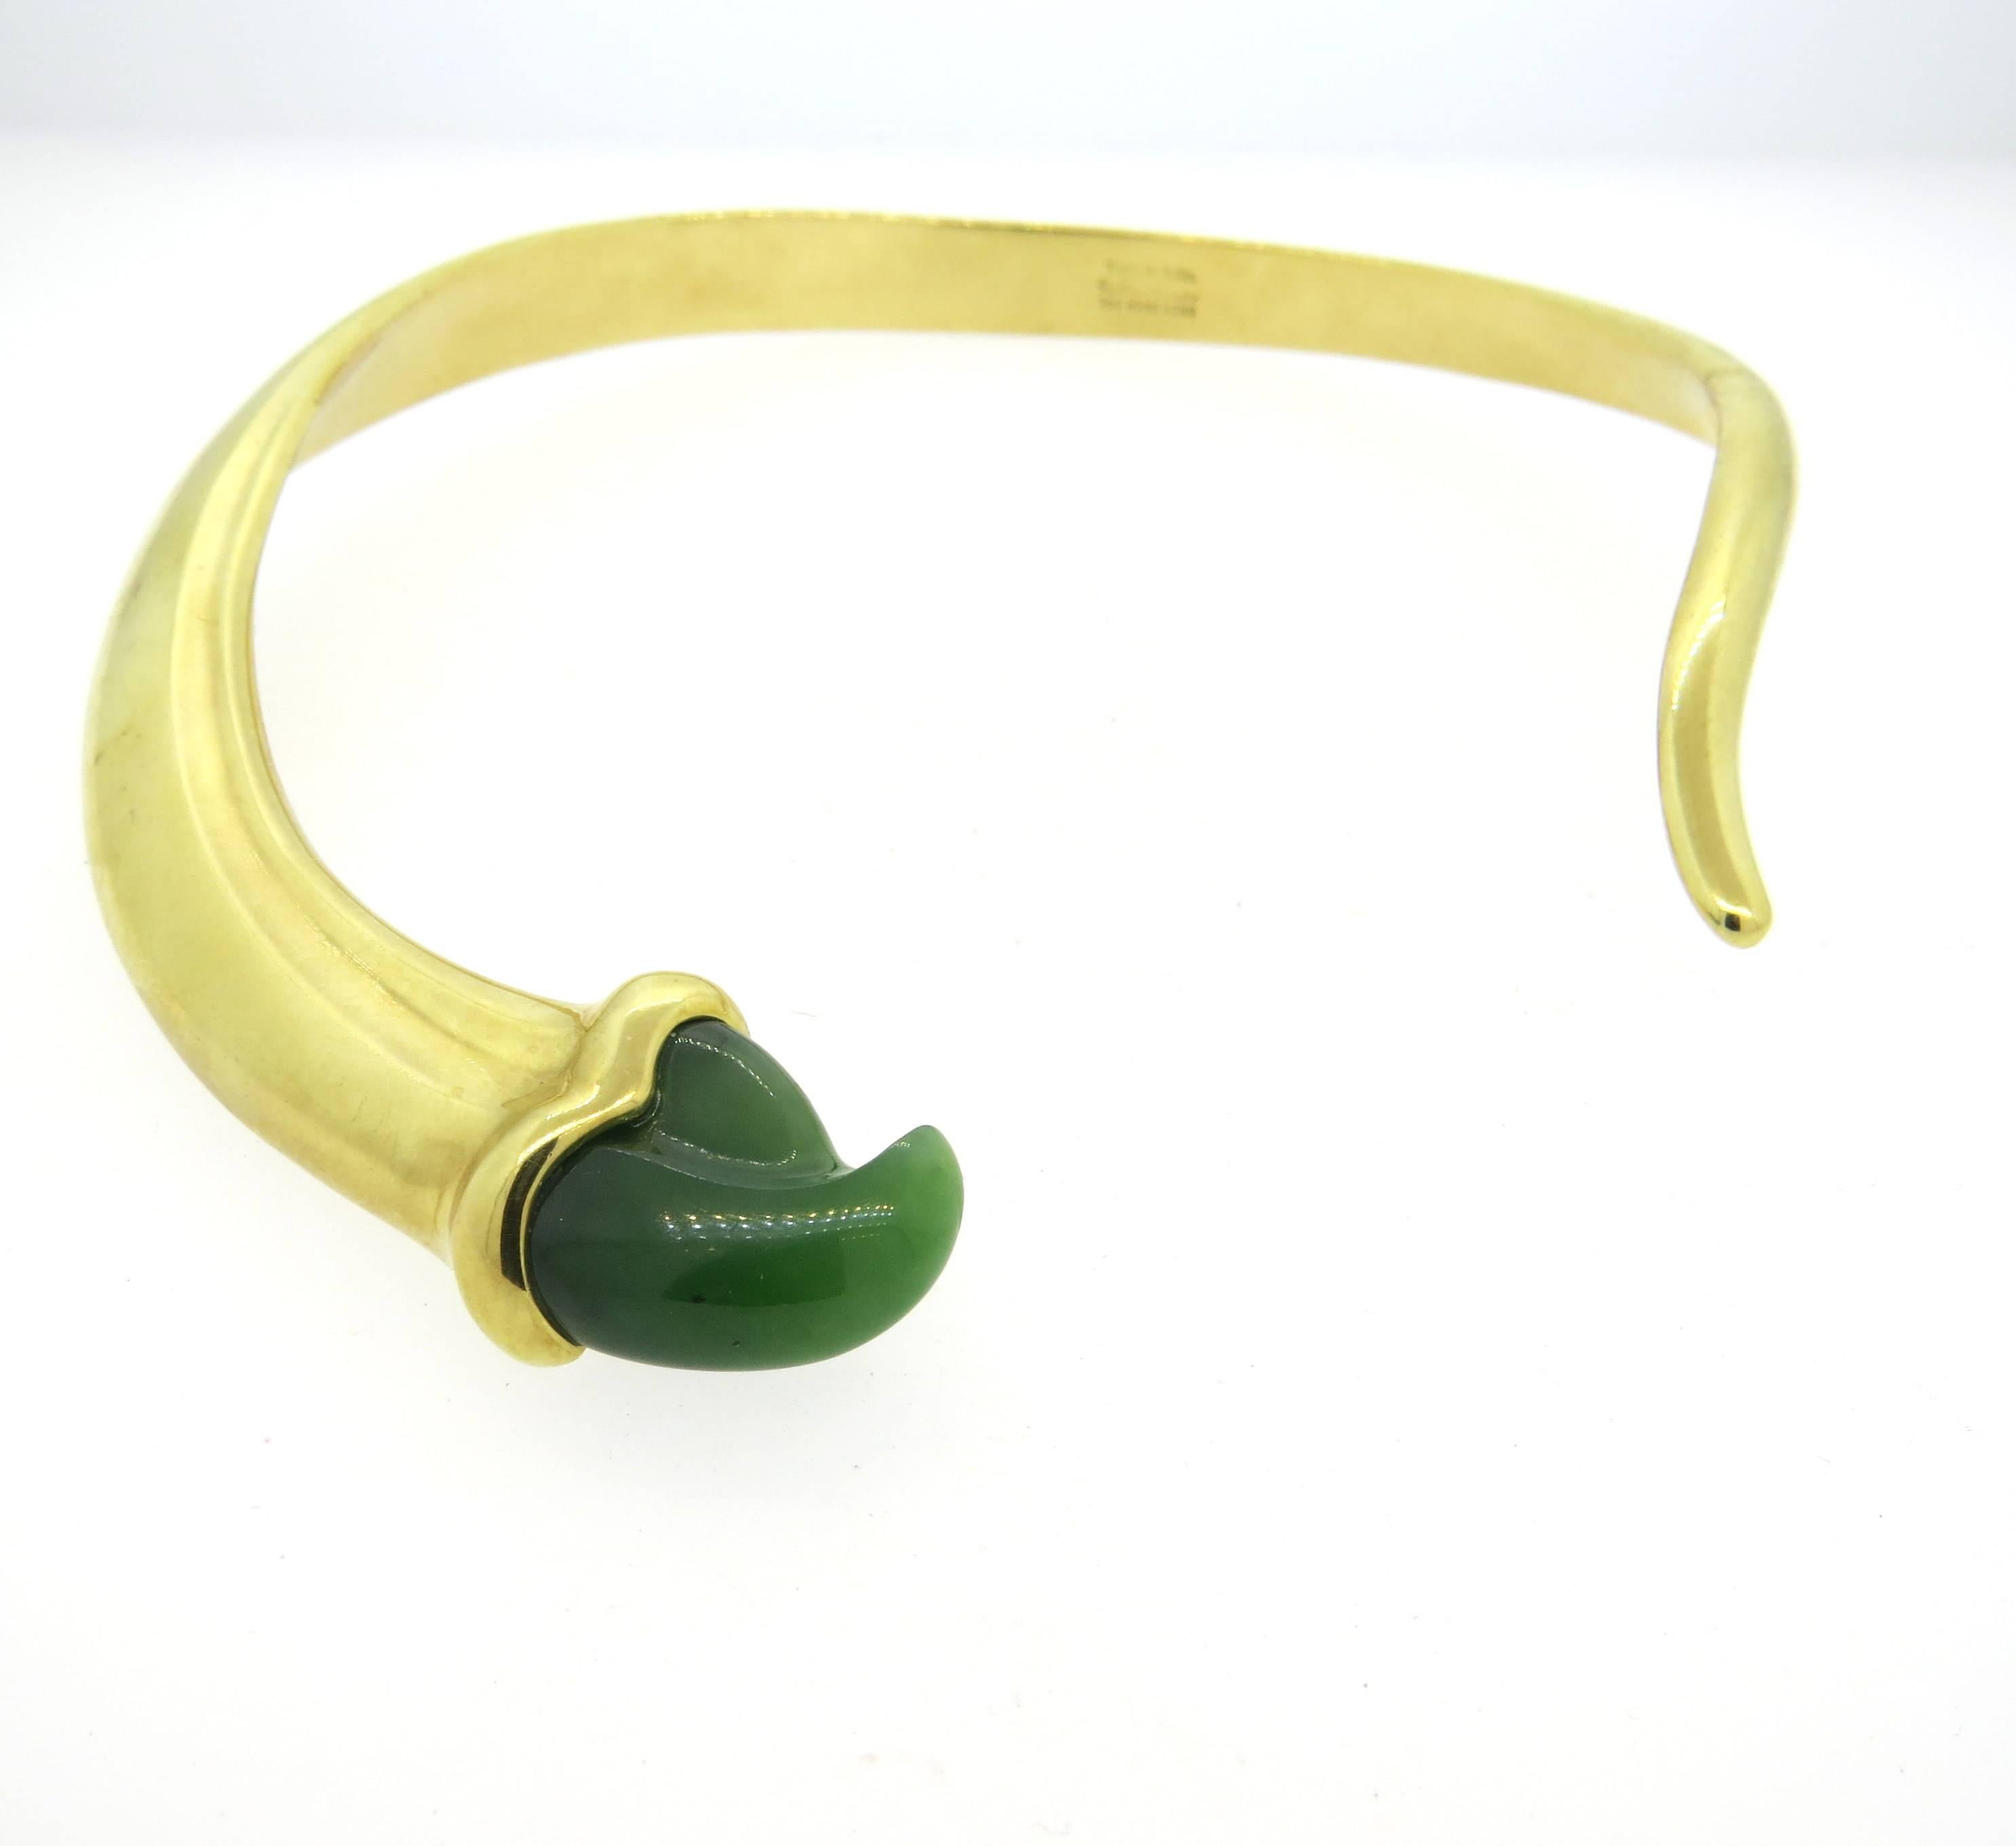 Rare and impressive 18k yellow gold collar necklace, crafted by Elsa Peretti for Tiffany & Co, set with carved nephrite. Necklace will fit an average 14